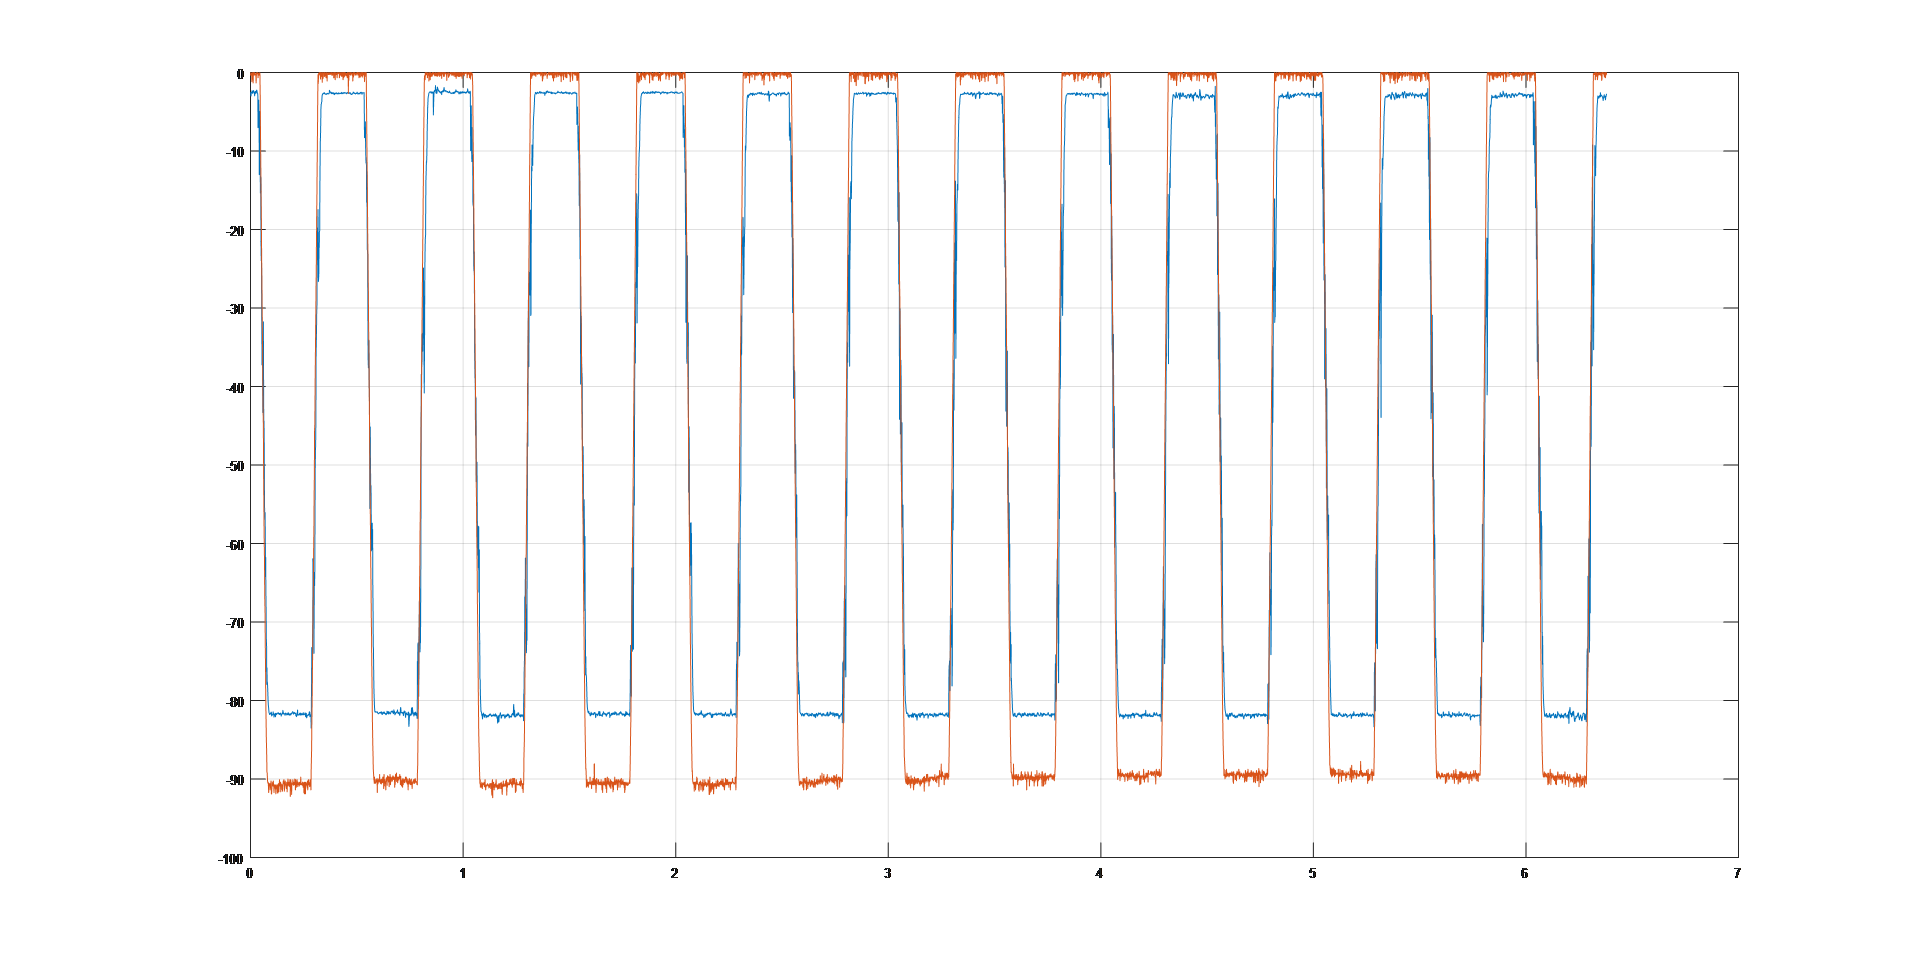 Graphs of signals from the potentiometer (orange color) and the MPU6050 sensor (blue color) along the Y axis